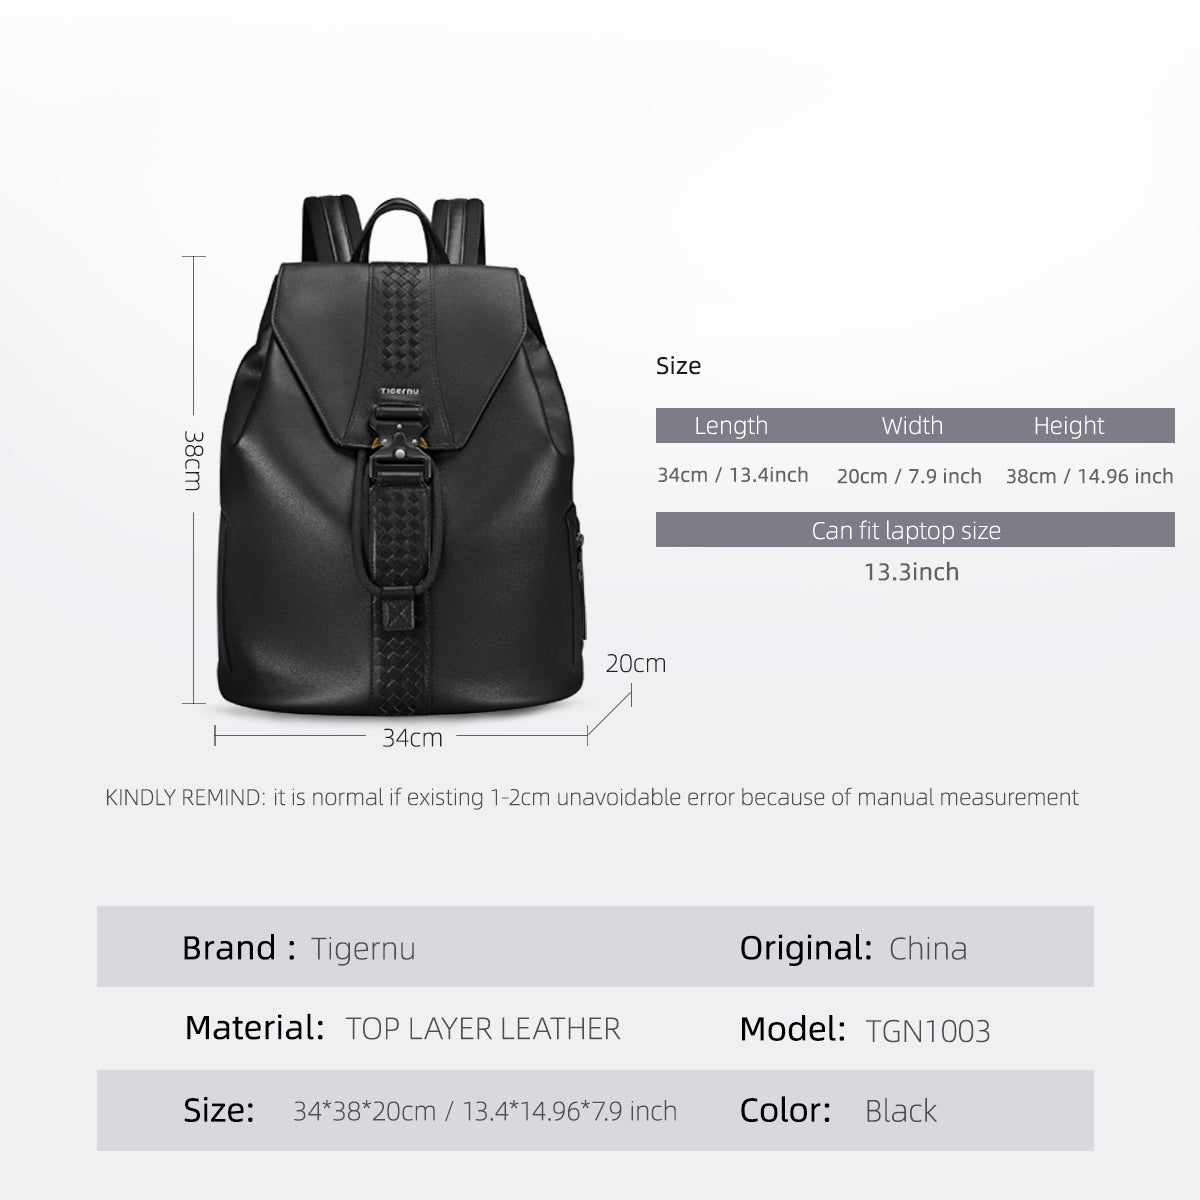 Tigernu Top Layer Leather Women Fashion Backpack Fit For 13.3inch Laptop Backpack Bag Large Capacity No Zipper Convenient To Use